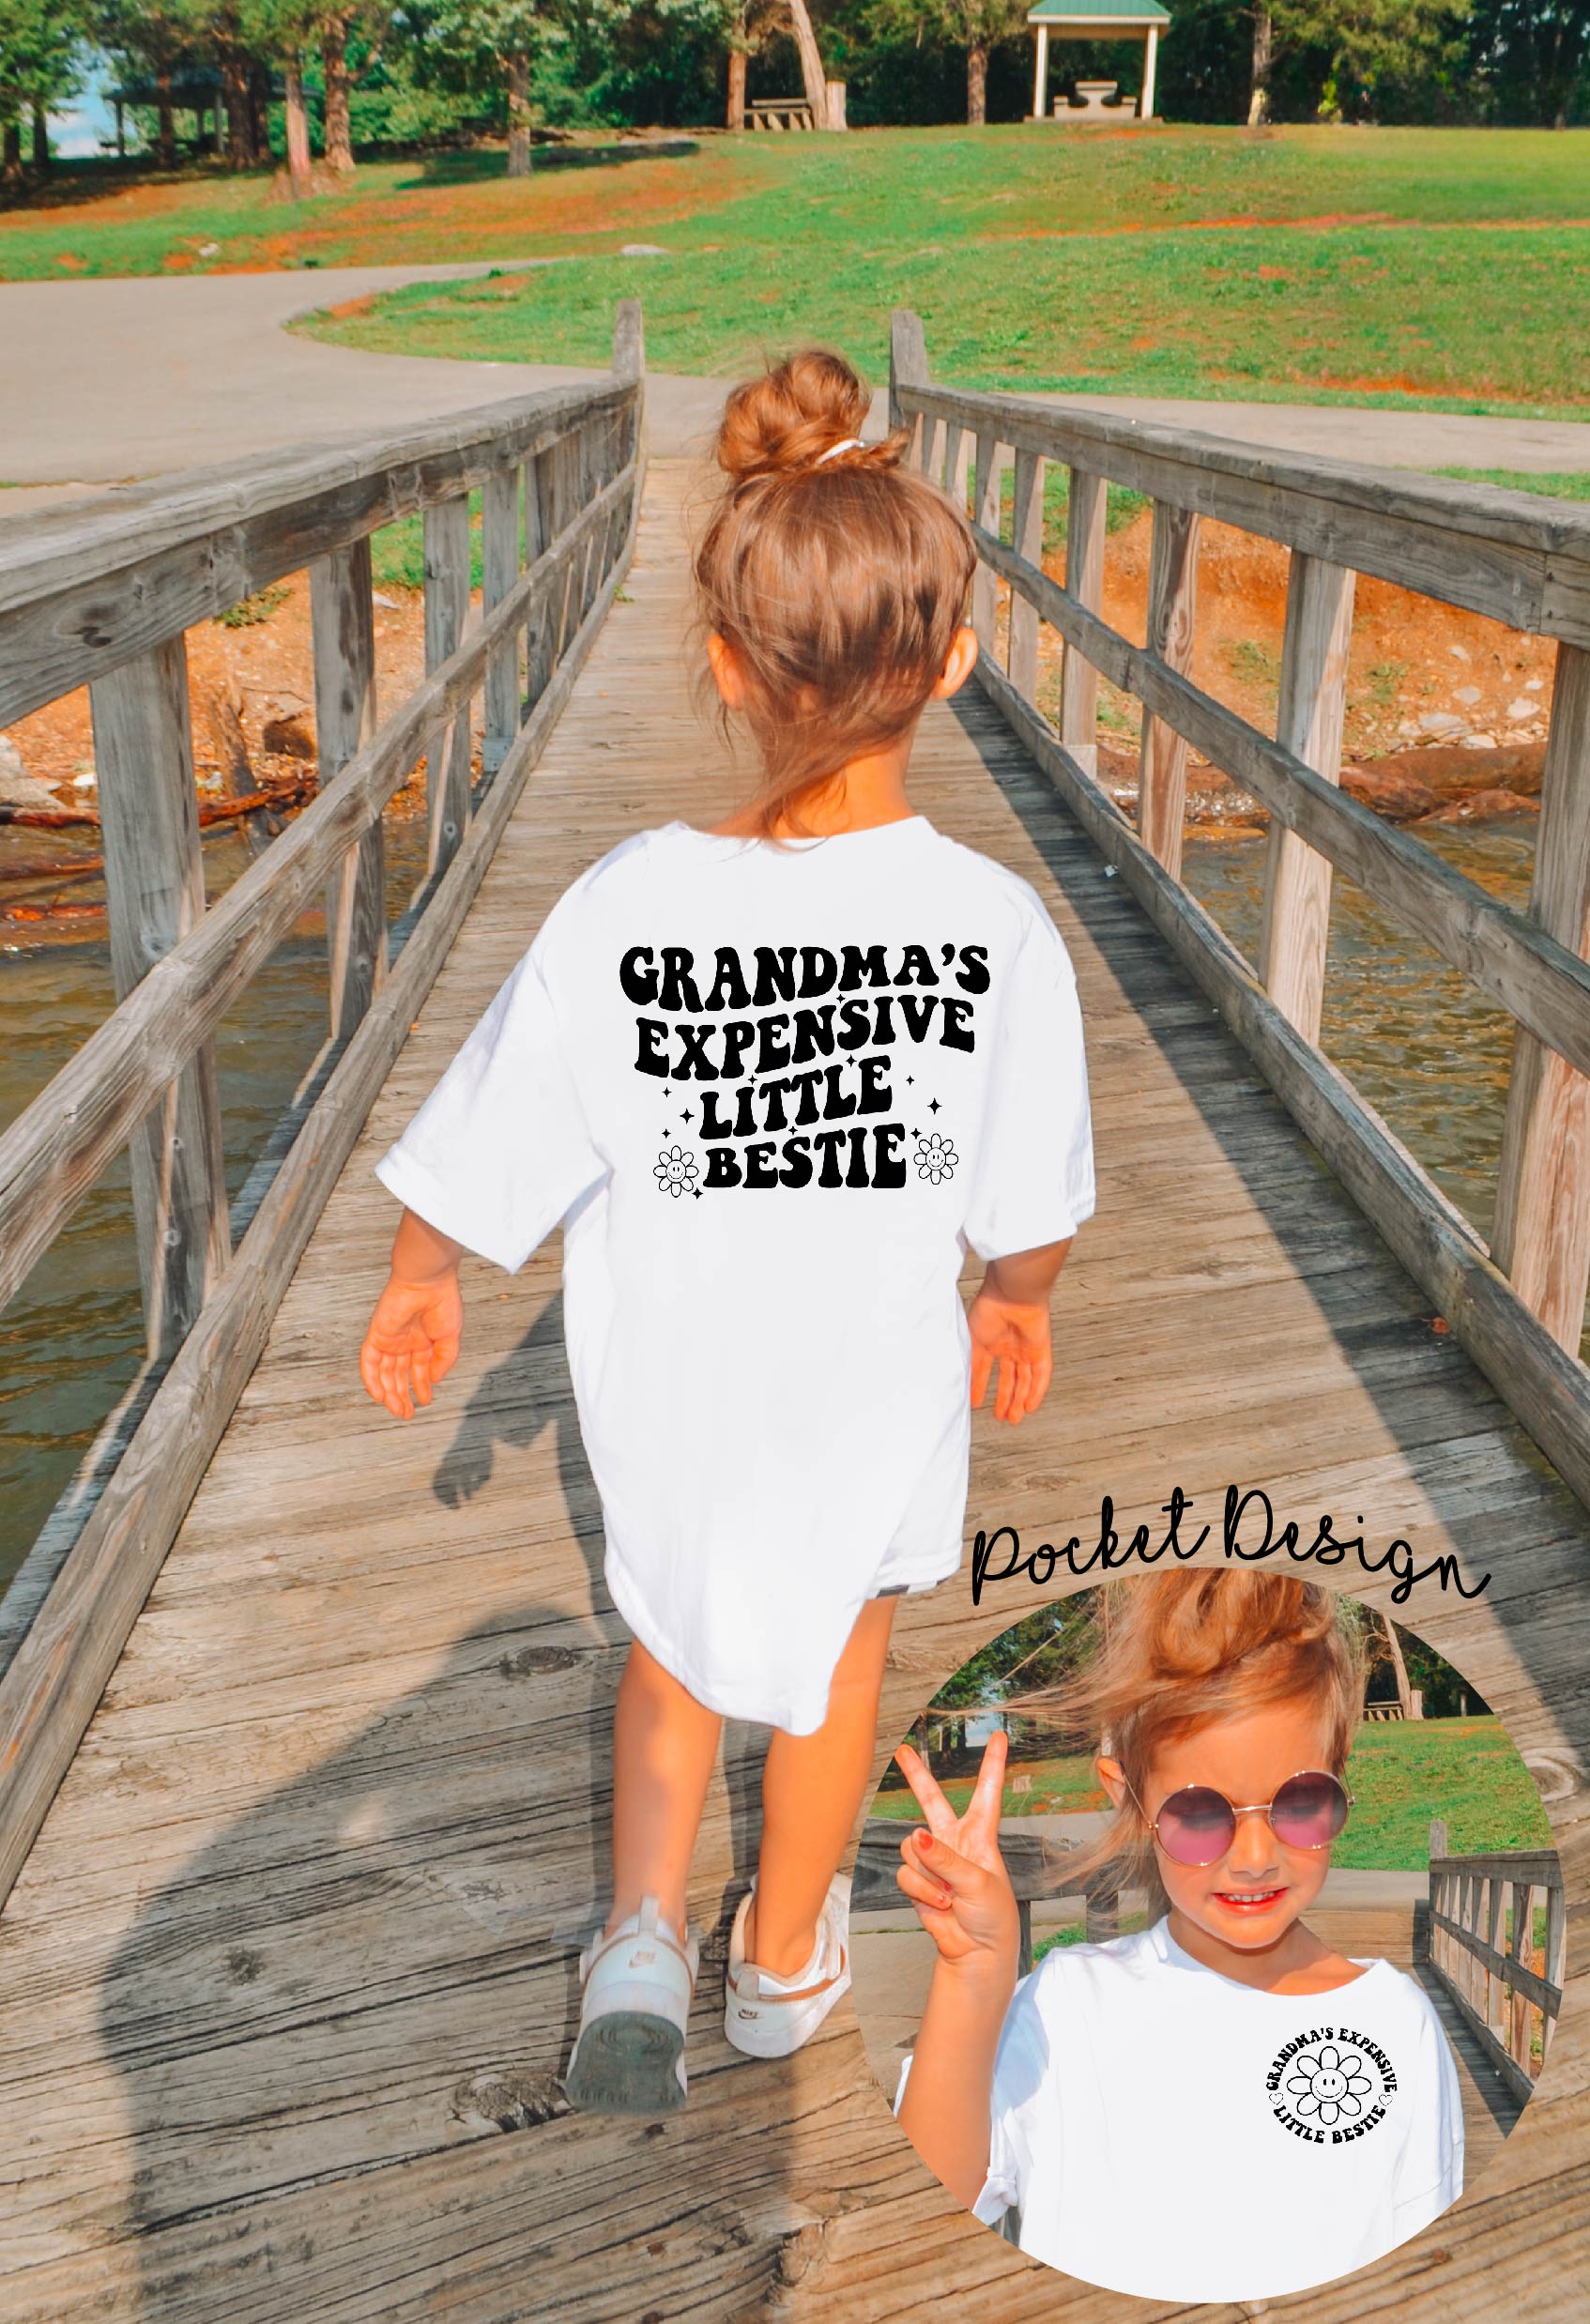 Grandma's Expensive Little Bestie/White (with pocket design) Sweatshirts also available